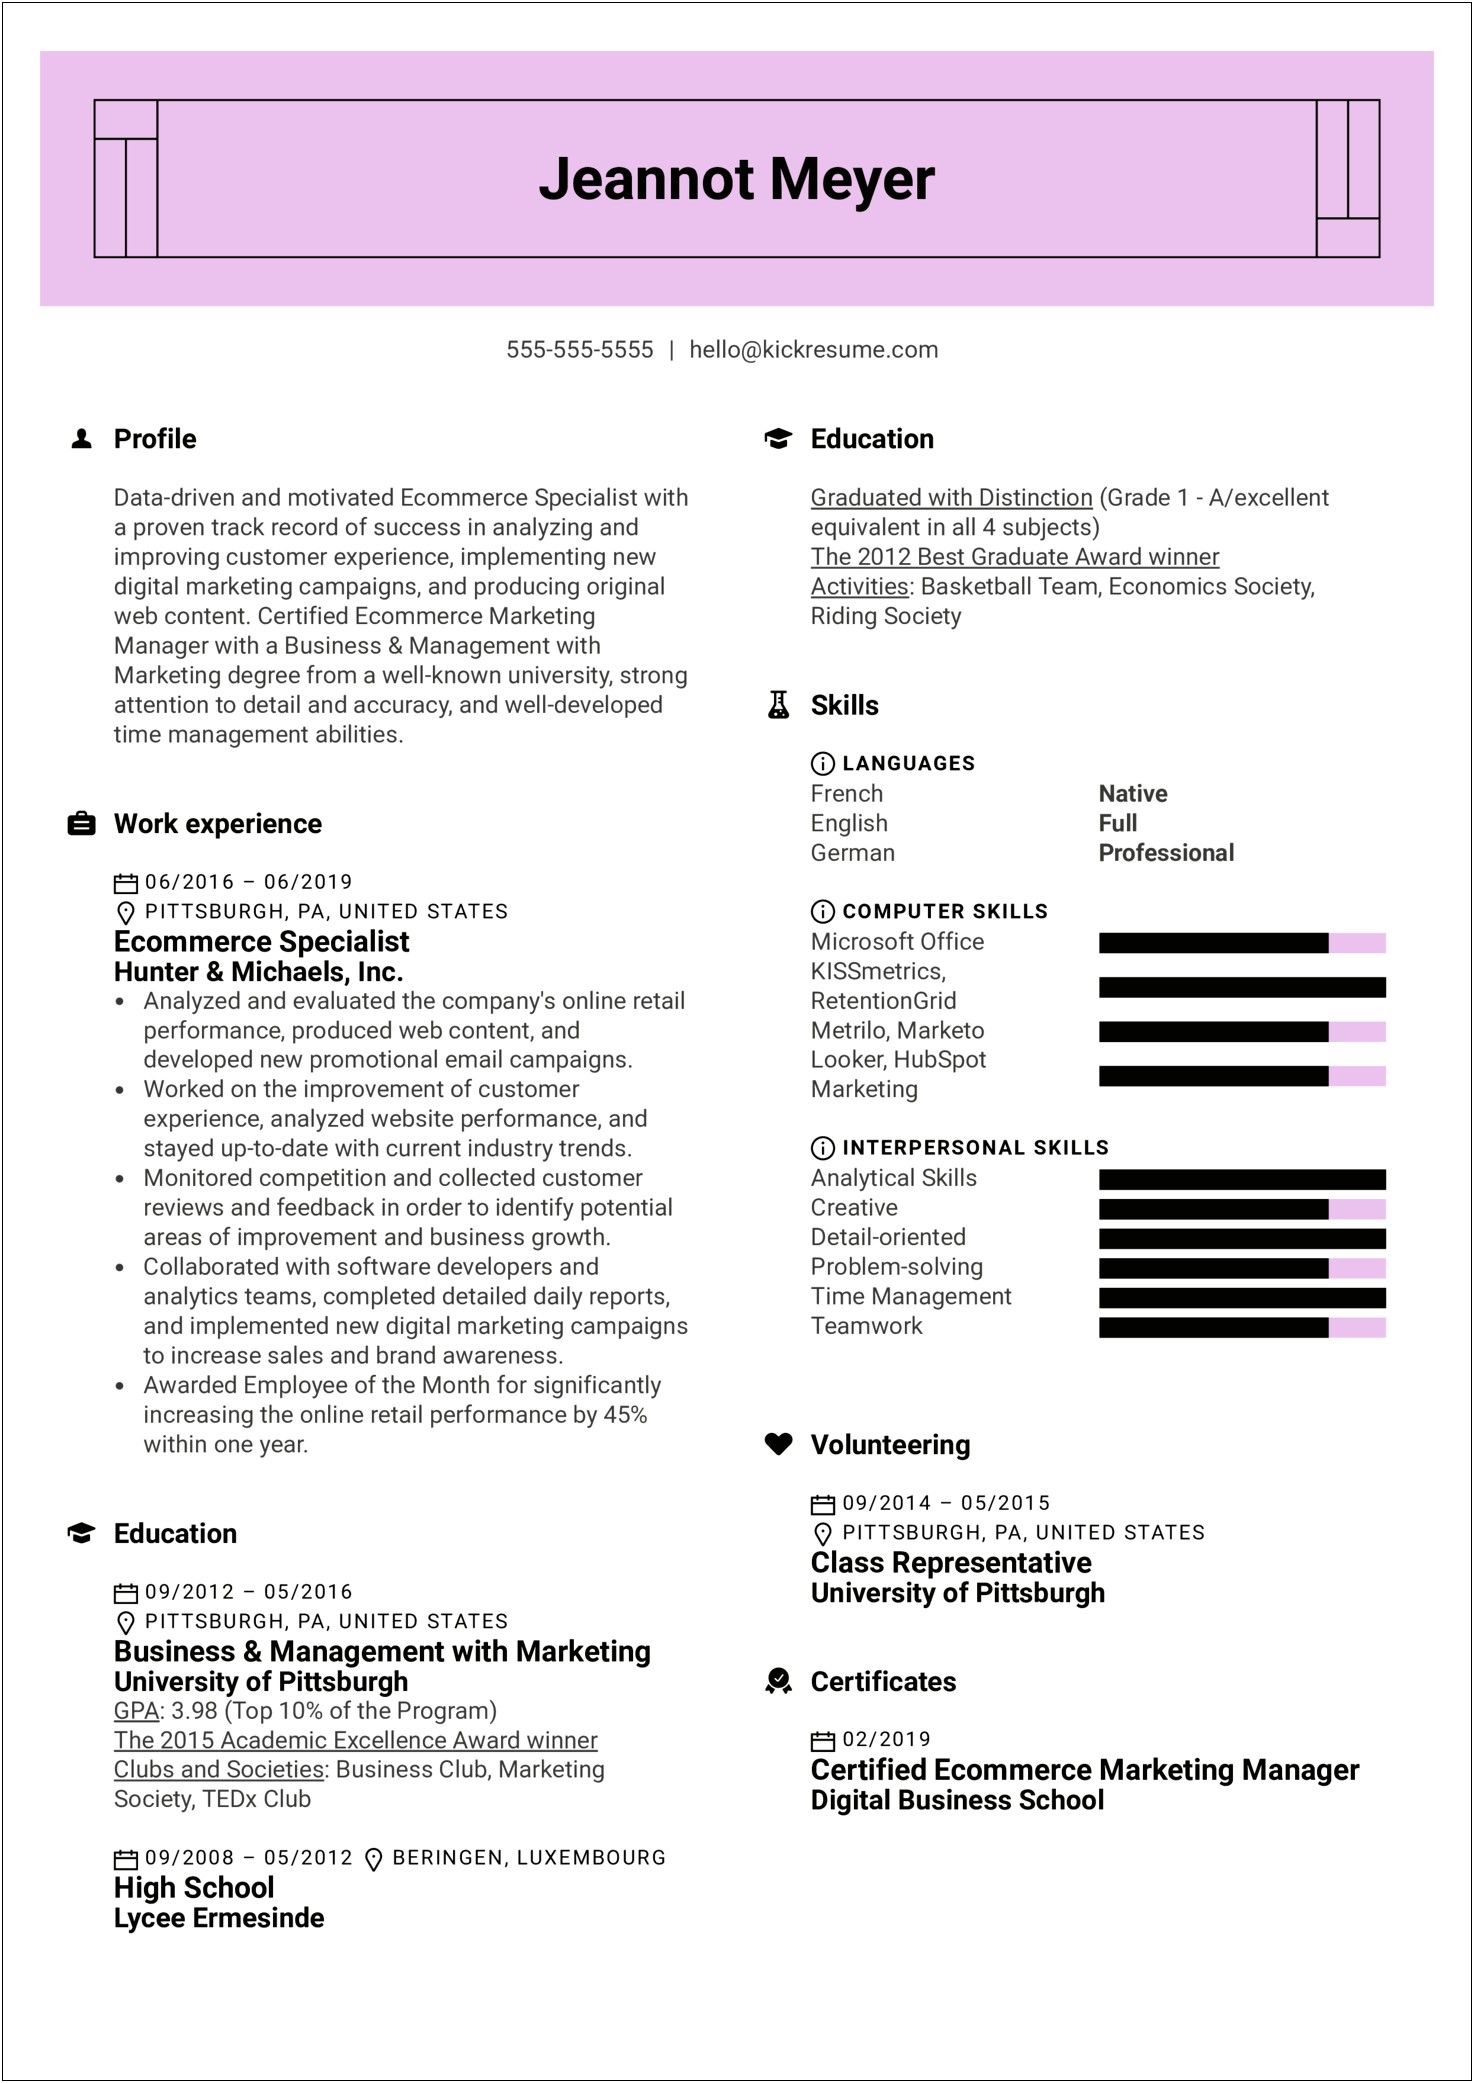 Resume Examples Of Digital Marketing Manager